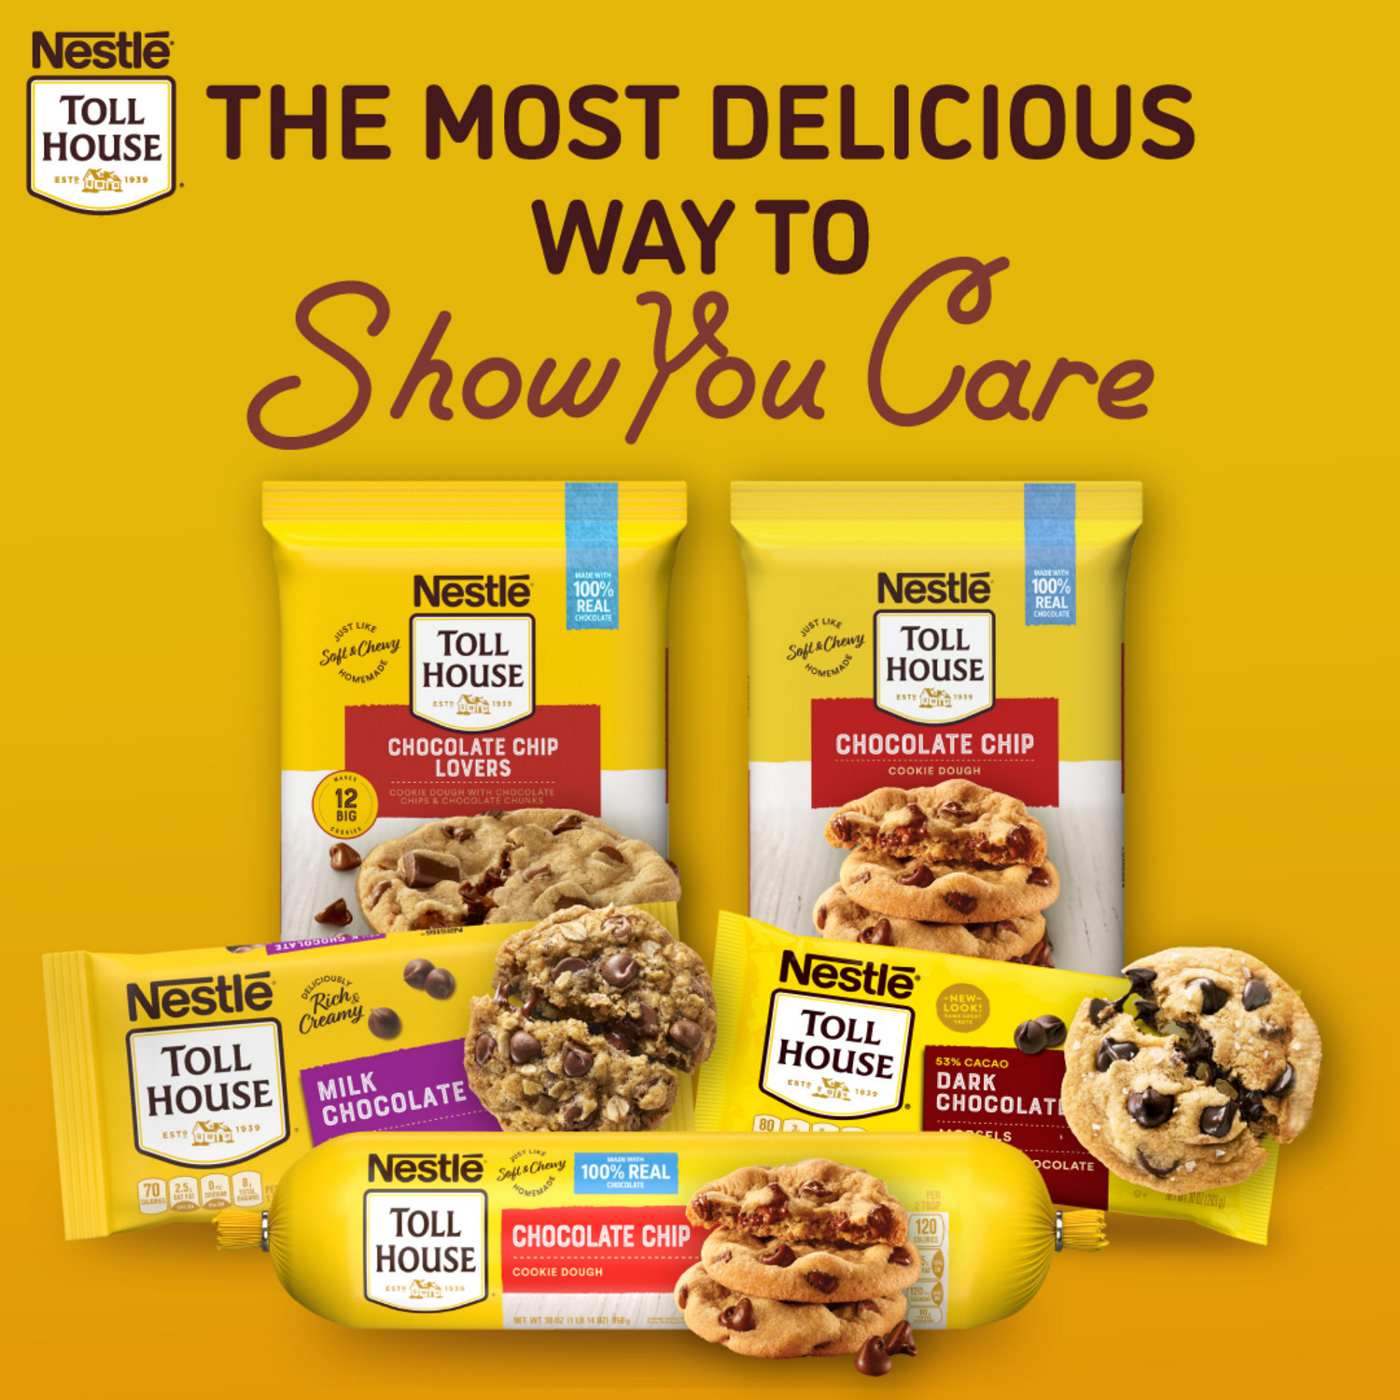 Nestle Toll House 53% Cacao Dark Chocolate Chips; image 2 of 5